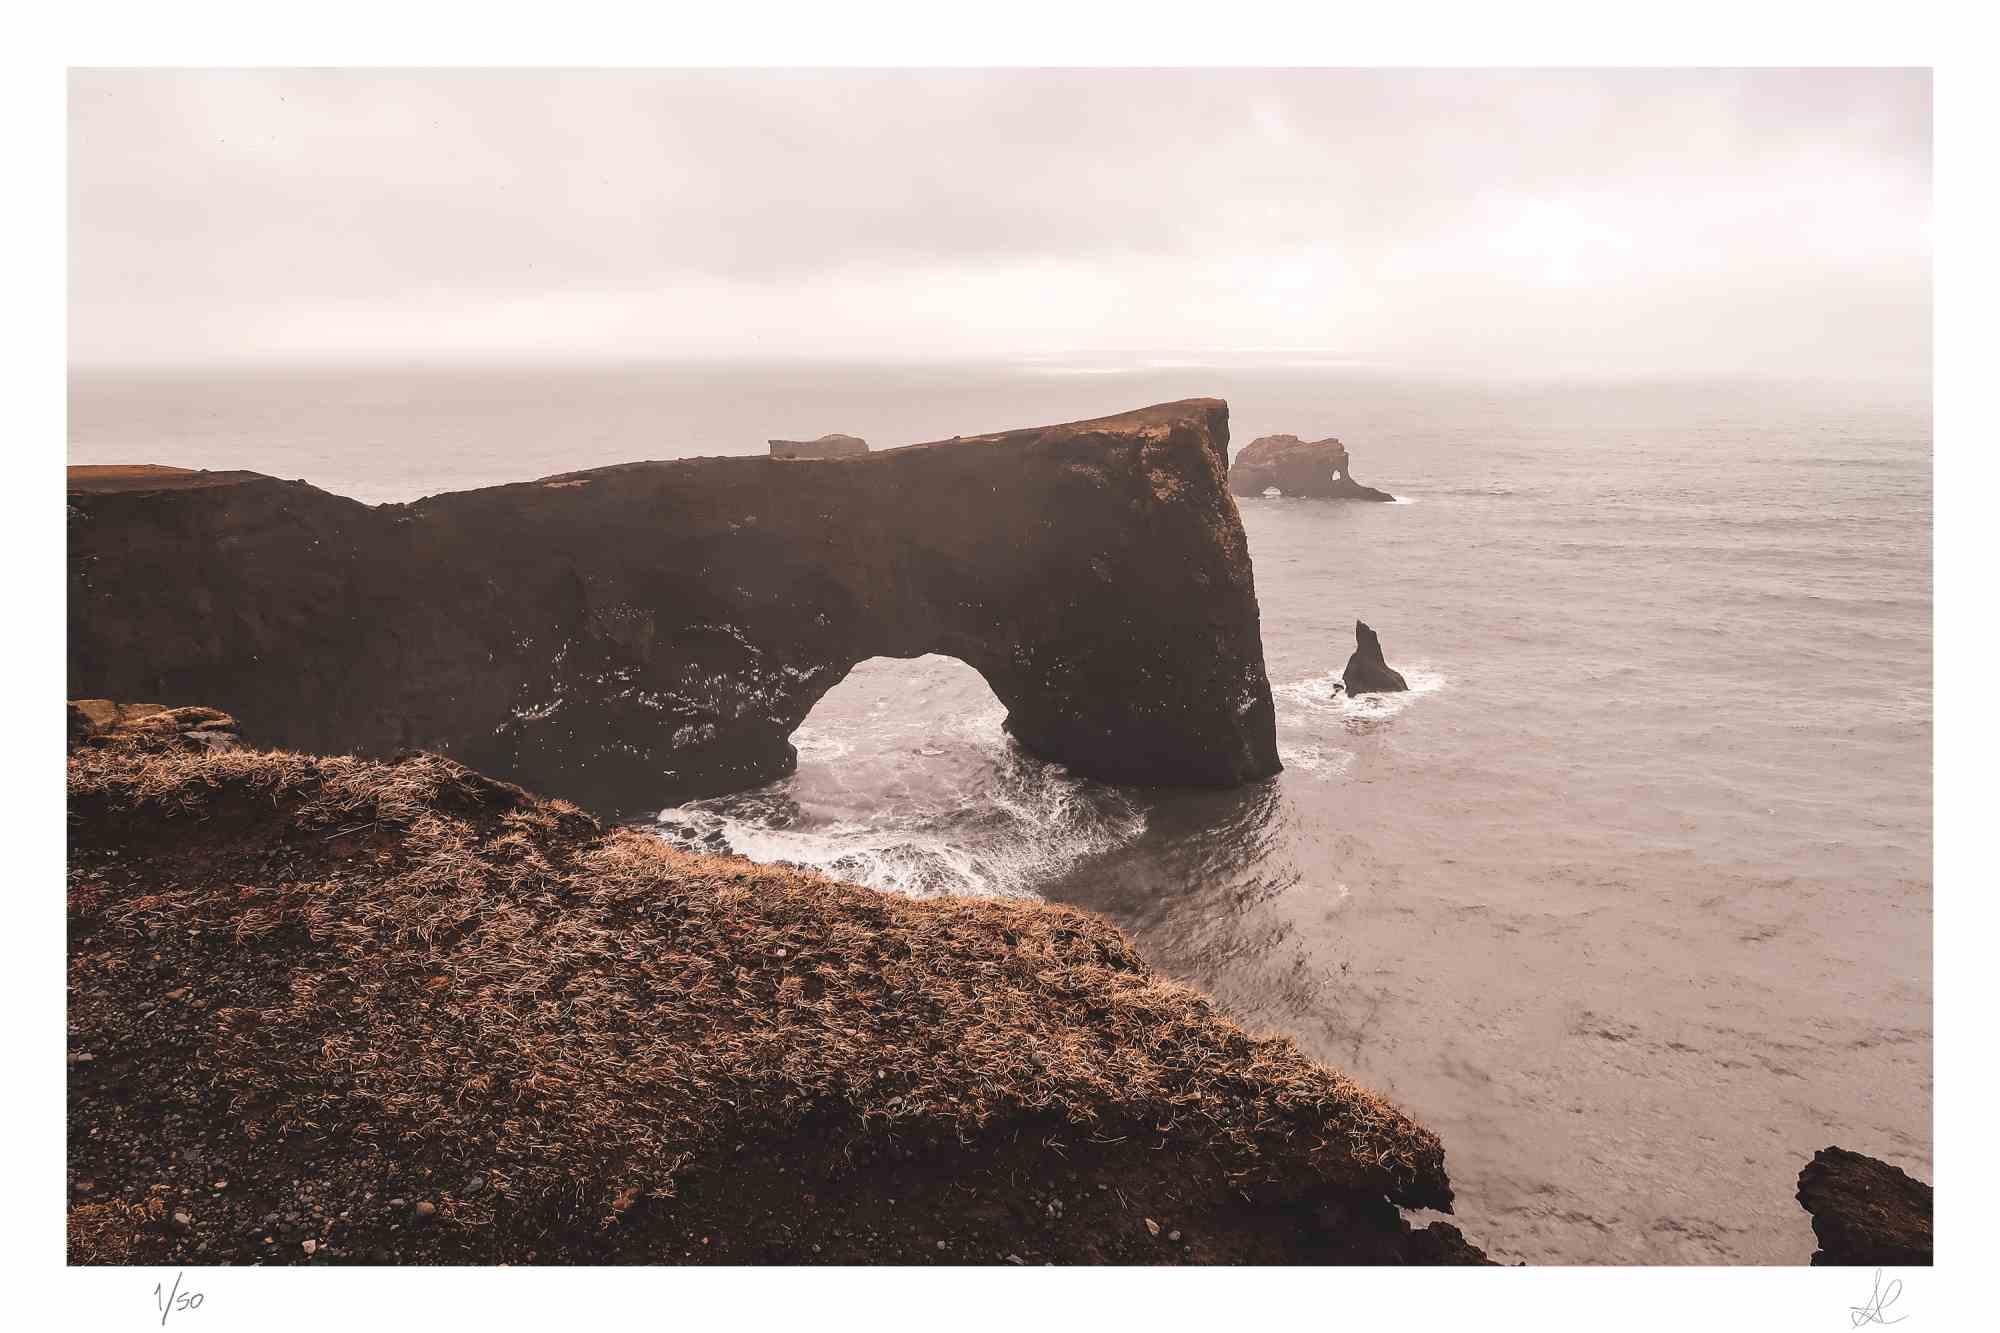 Love Bridge is a photograph taken by Amanda Ludovisi in 2018.

It represents a dreamlike landscape in Iceland, with dark tones. This is a giclée print on Canson Baryta Matt paper. Limited edition of 50 copies.

Monogrammed on the lower right and